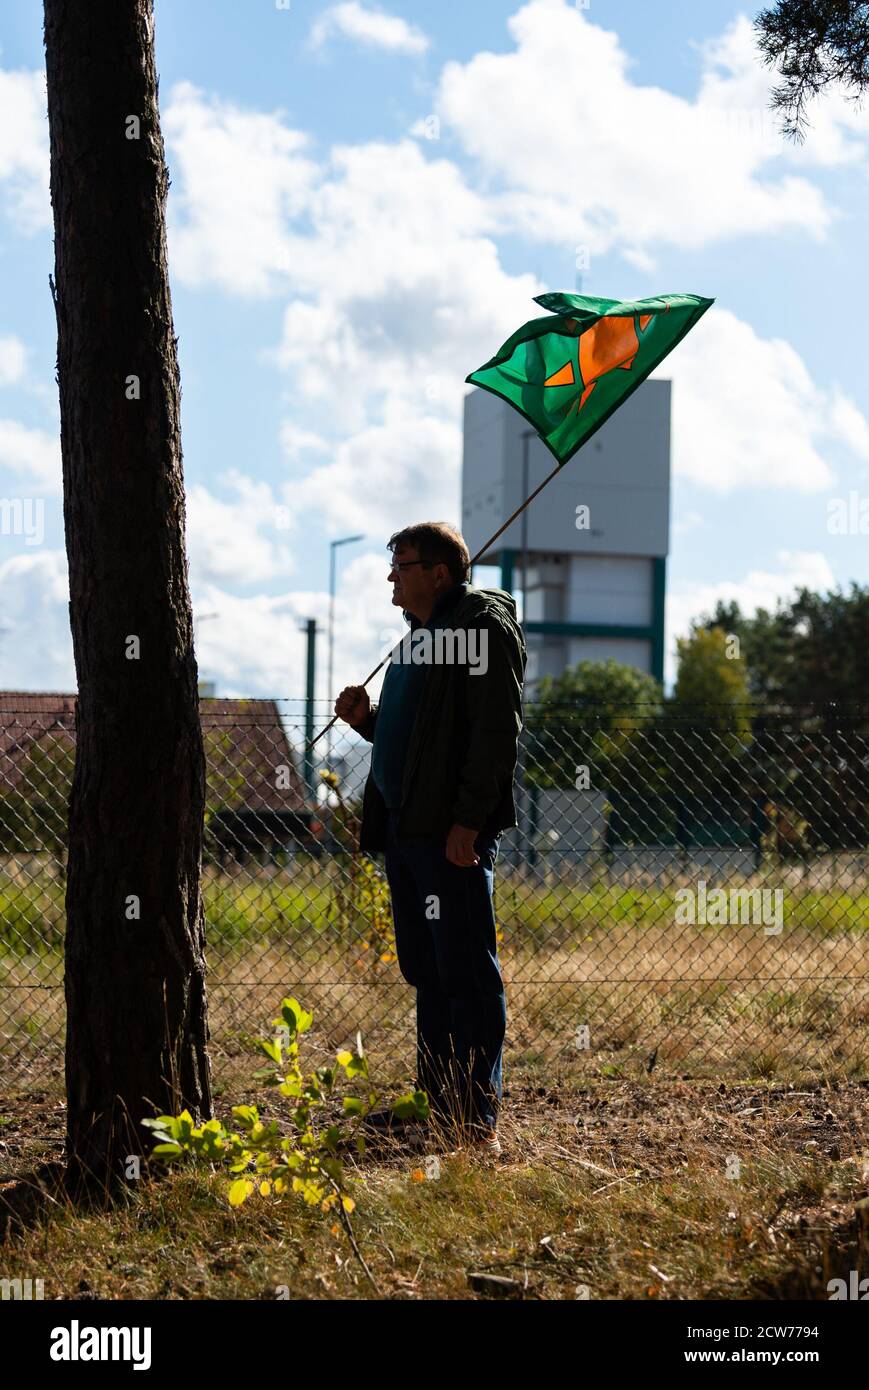 Gorleben, Germany. 28th Sep, 2020. Ulrich Sandvoß, opponent of nuclear power, stands with a flag in front of the former exploration mountain in Gorleben. According to the findings of the Federal Society for Final Disposal, 90 areas in Germany have favourable geological conditions for a nuclear waste repository. The Gorleben salt dome in Lower Saxony is not among them. Credit: Philipp Schulze/dpa/Alamy Live News Stock Photo